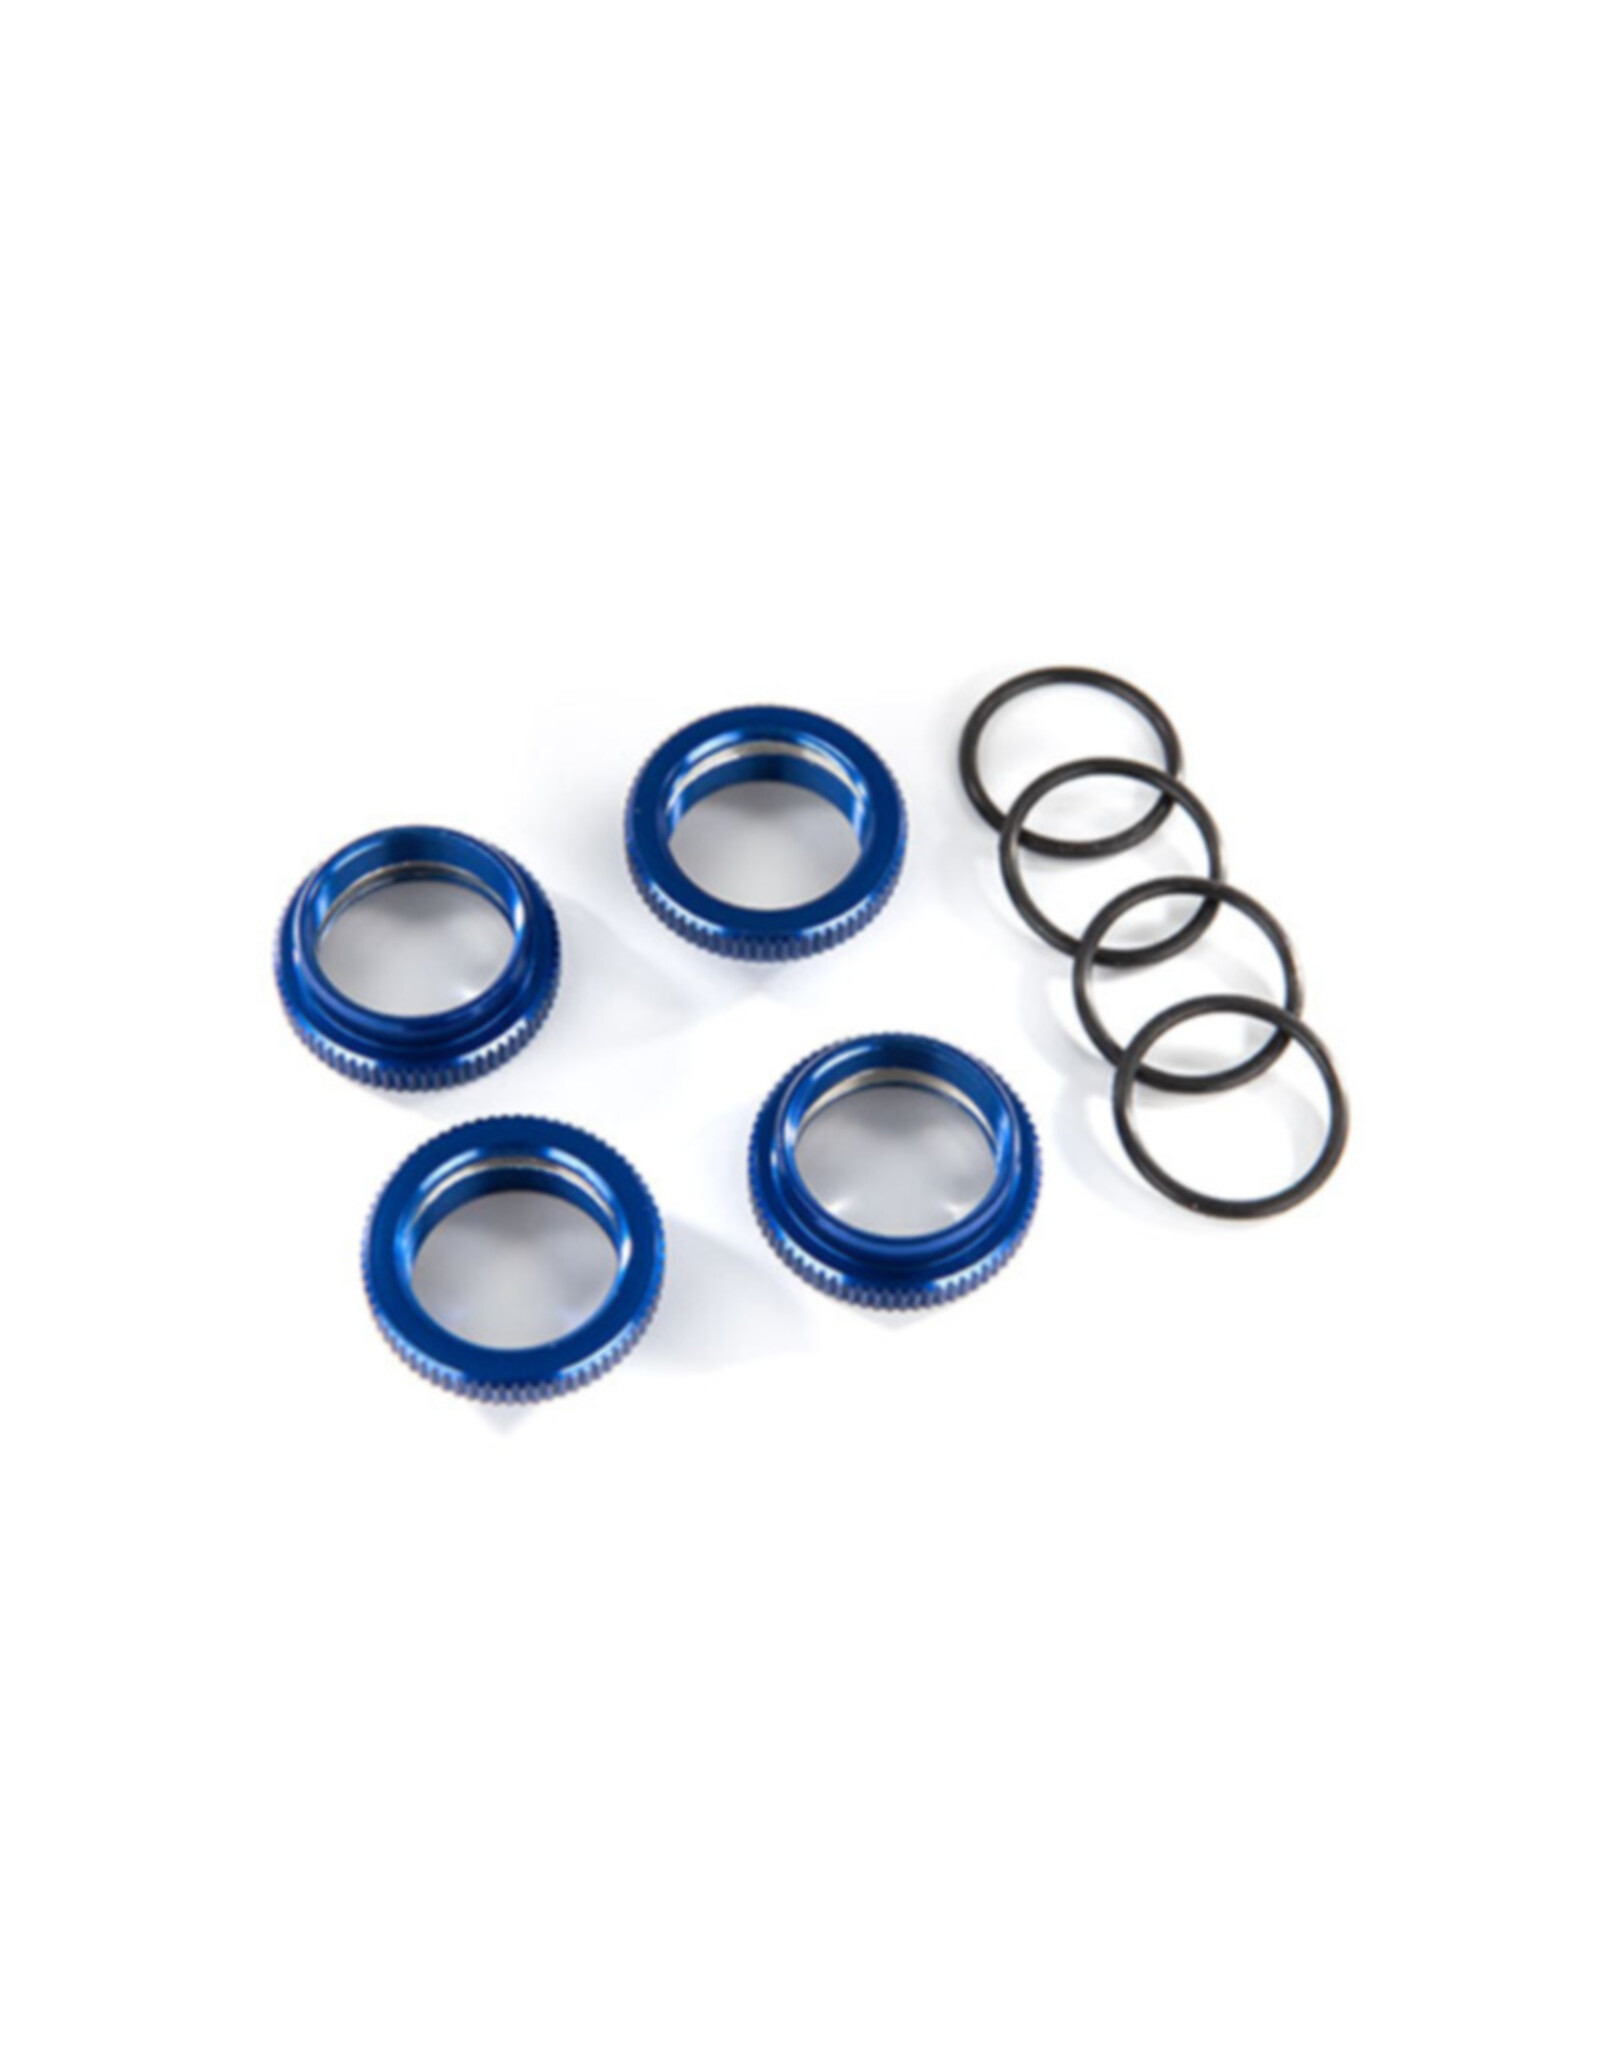 Traxxas TRA8968X - Spring retainer (adjuster), blue-anodized aluminum, GT-Maxx® shocks (4) (assembled with o-ring)